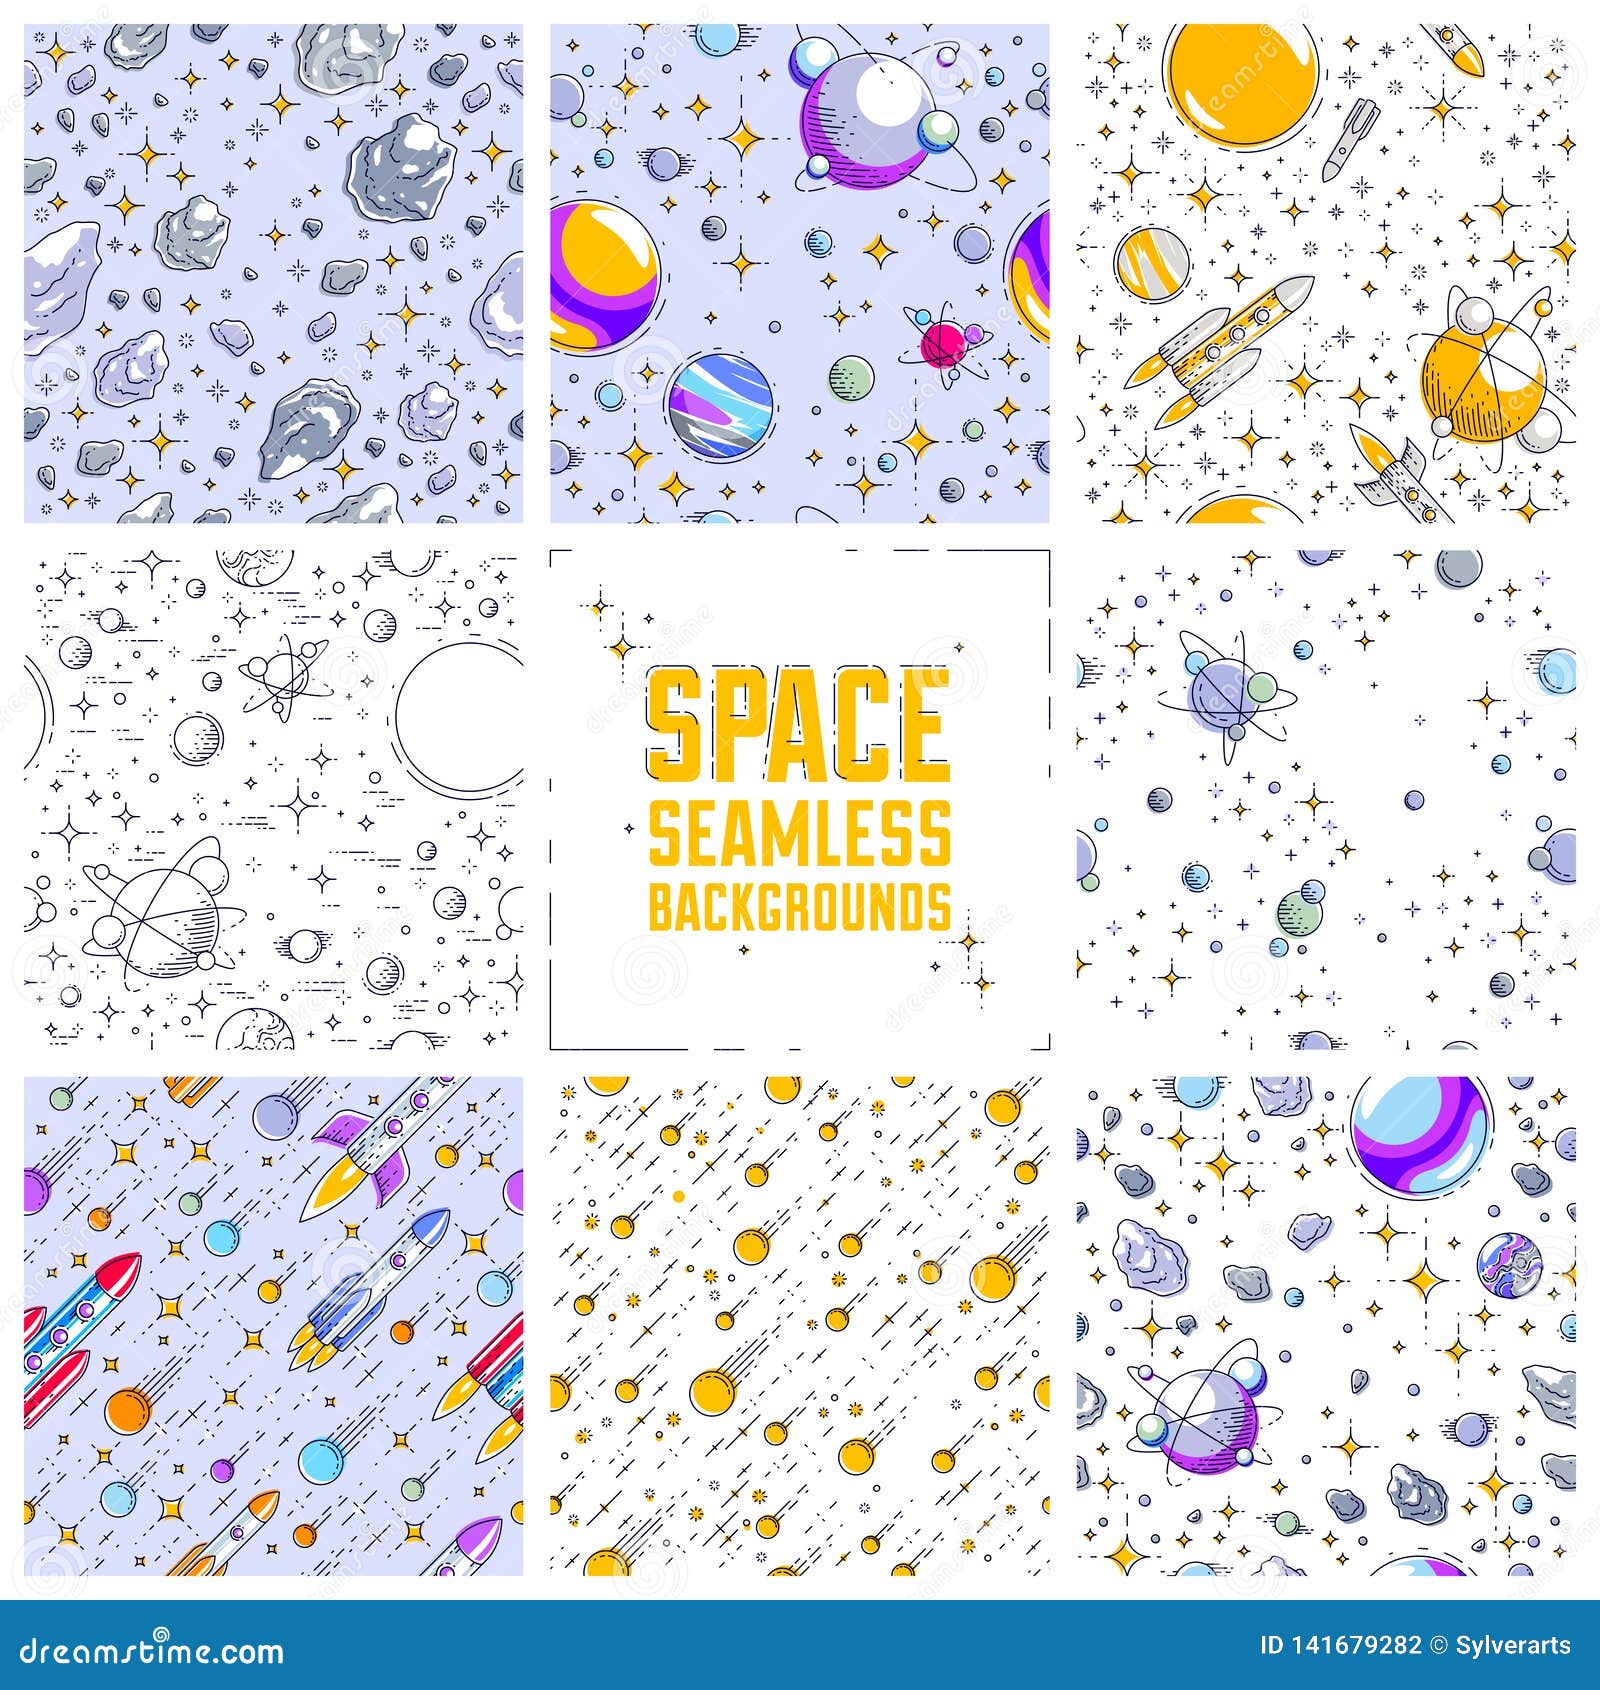 space seamless background with rockets, planets, asteroids, comets, meteors and stars, undiscovered galaxy fantastic textile